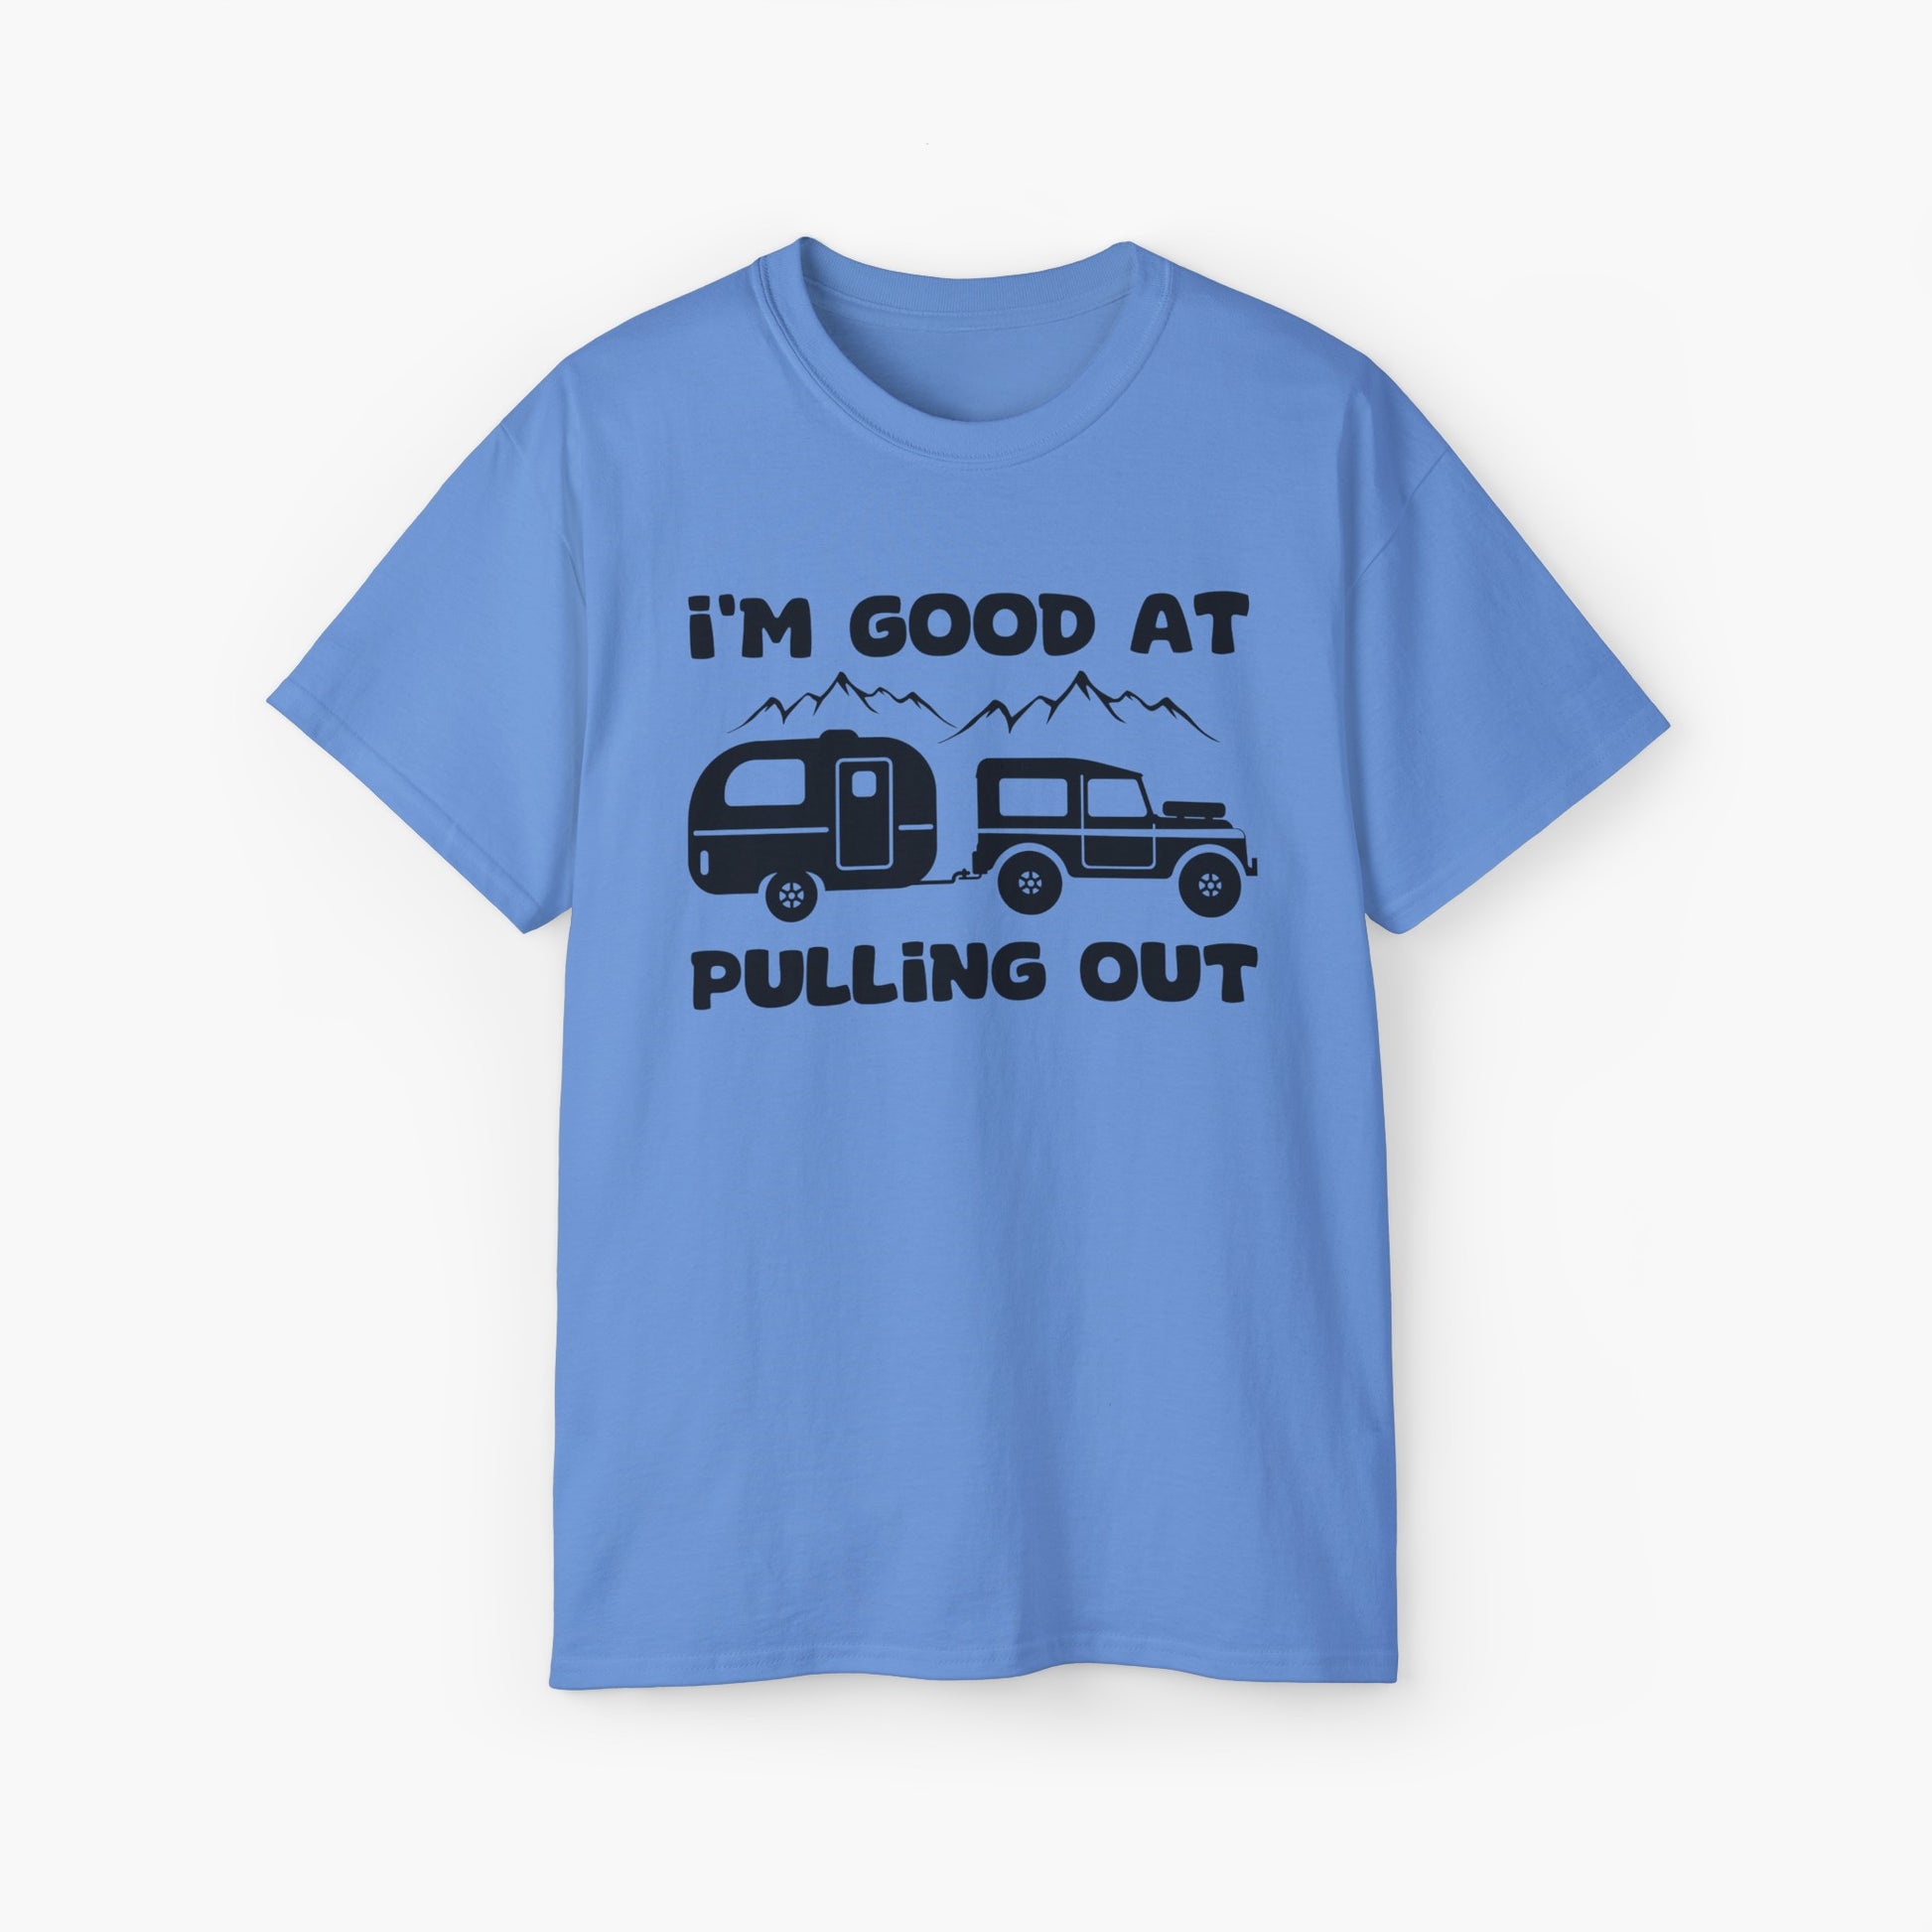 Blue t-shirt with humorous text 'I'm good at pulling out' featuring an image of a truck pulling a camping van, set against mountains on a plain background.